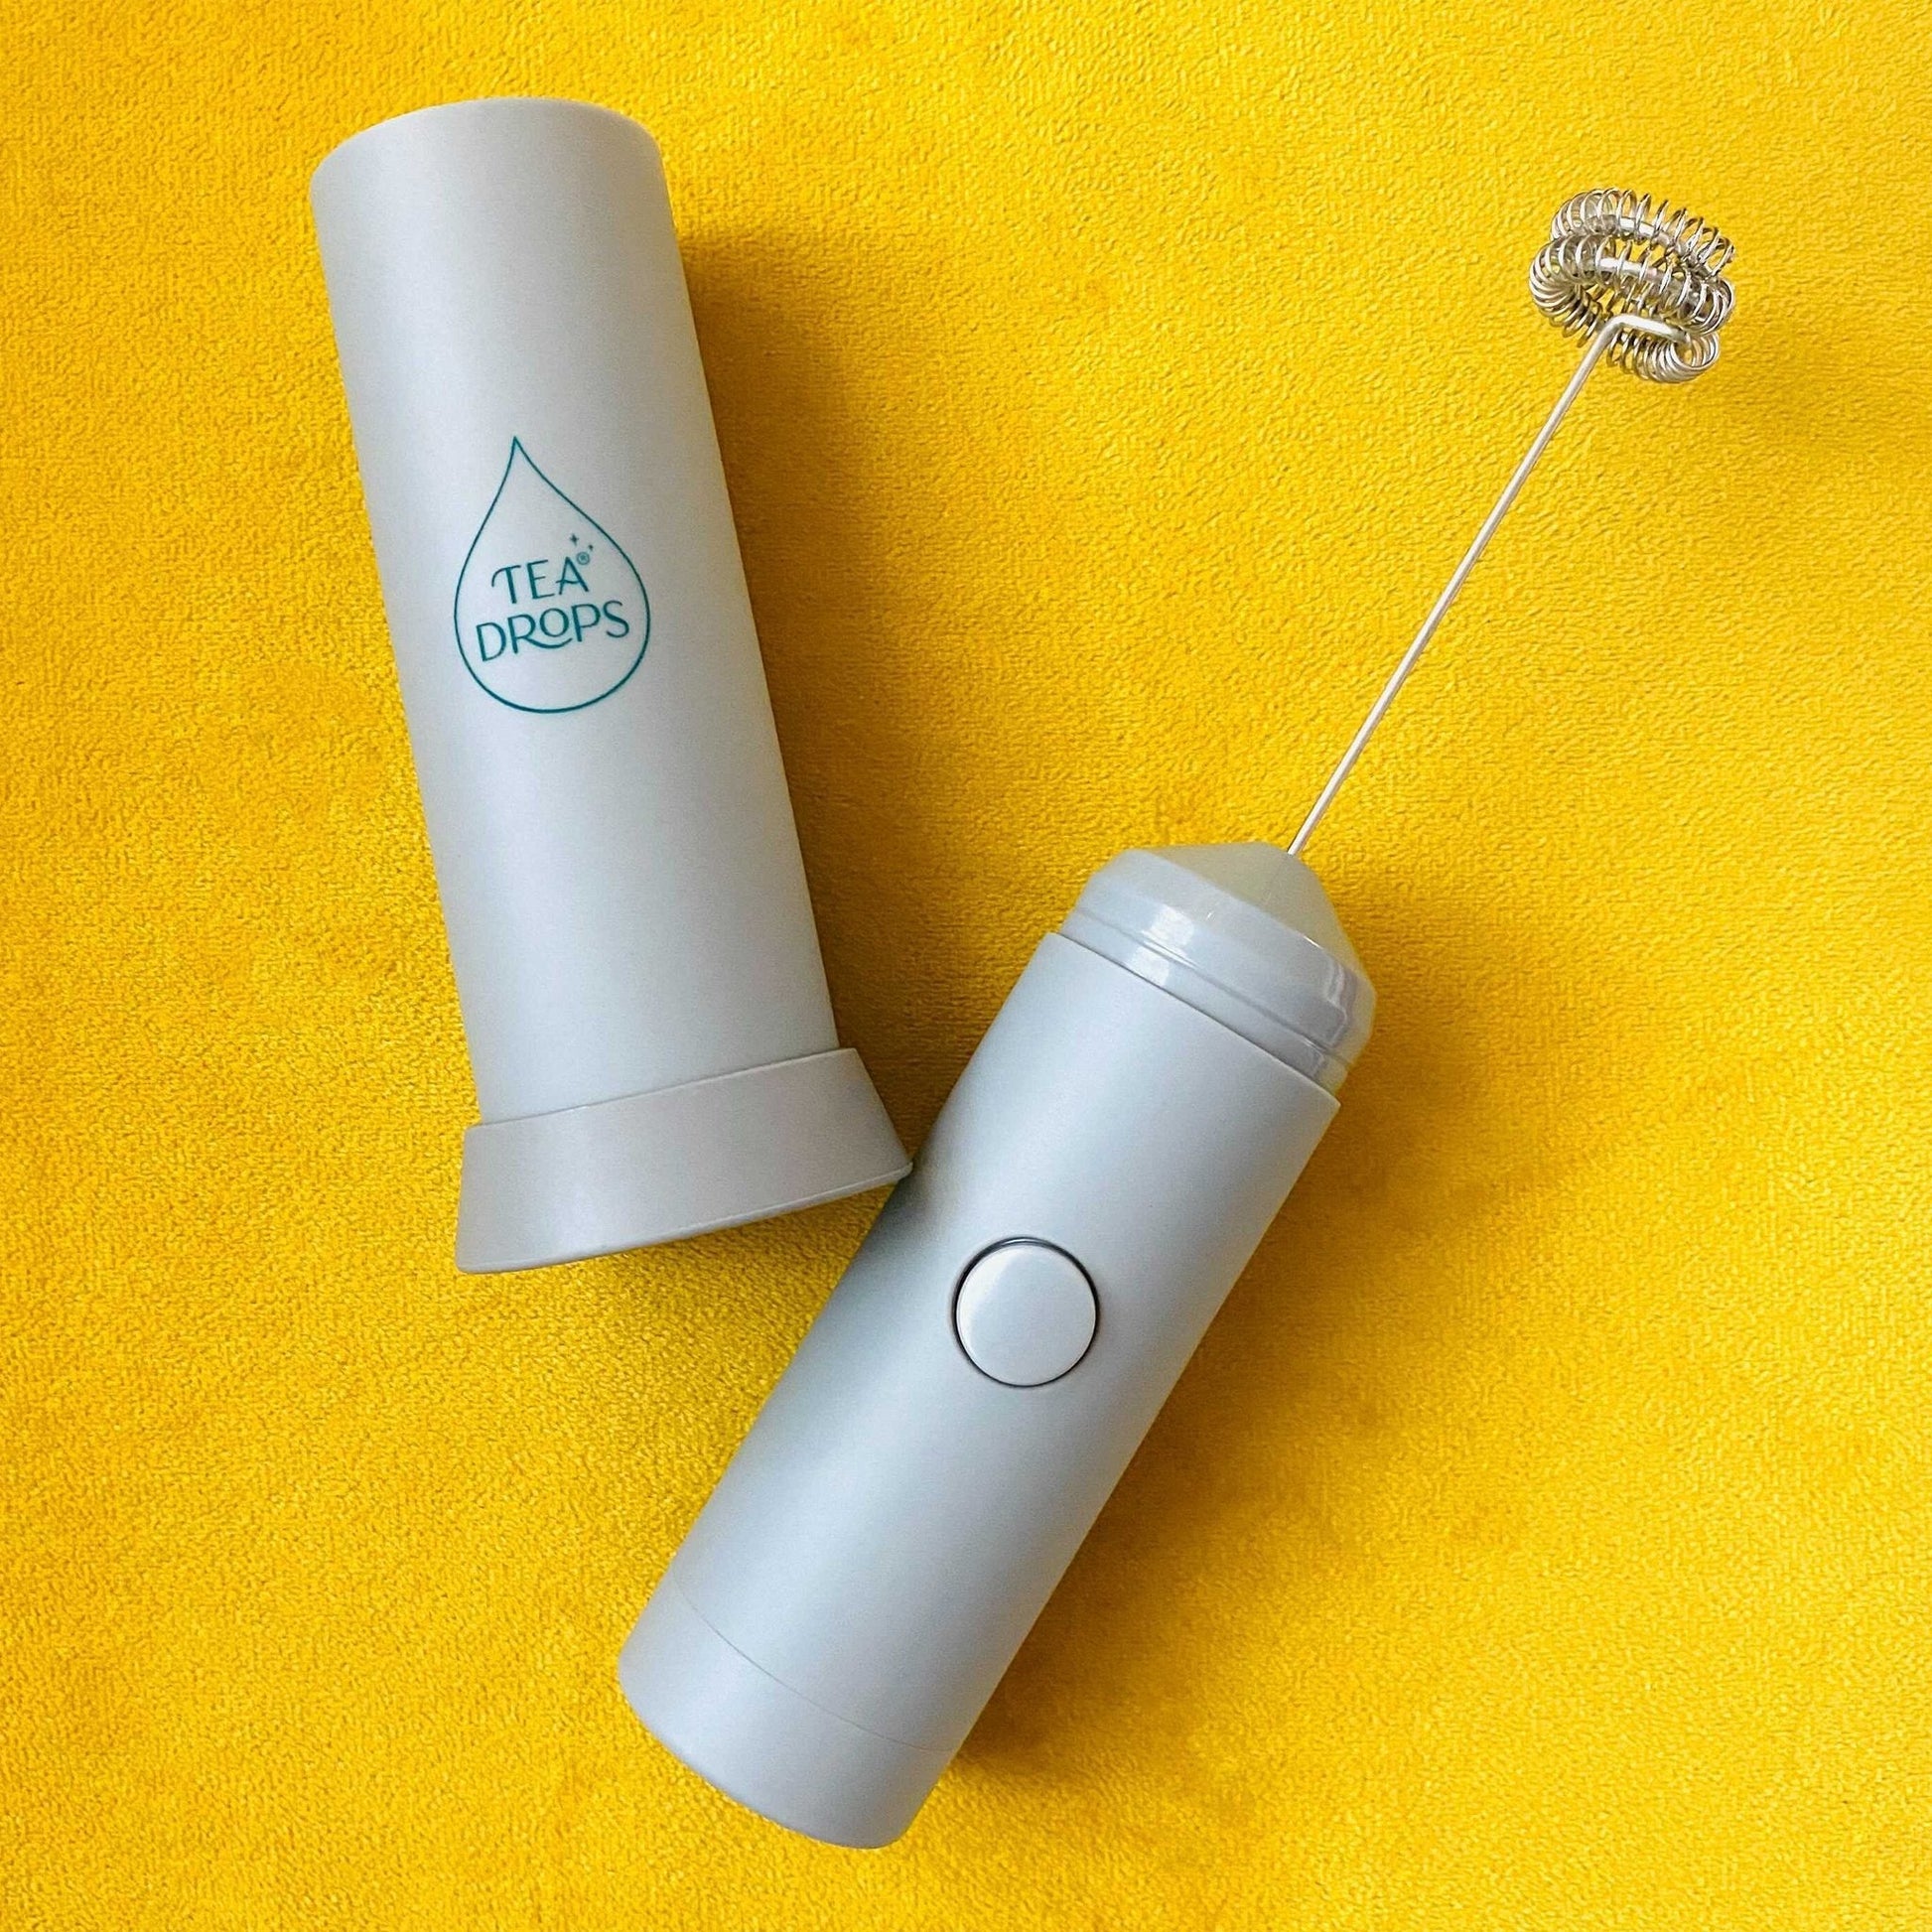 Easy to store and clean - Our frother comes with a convenient and